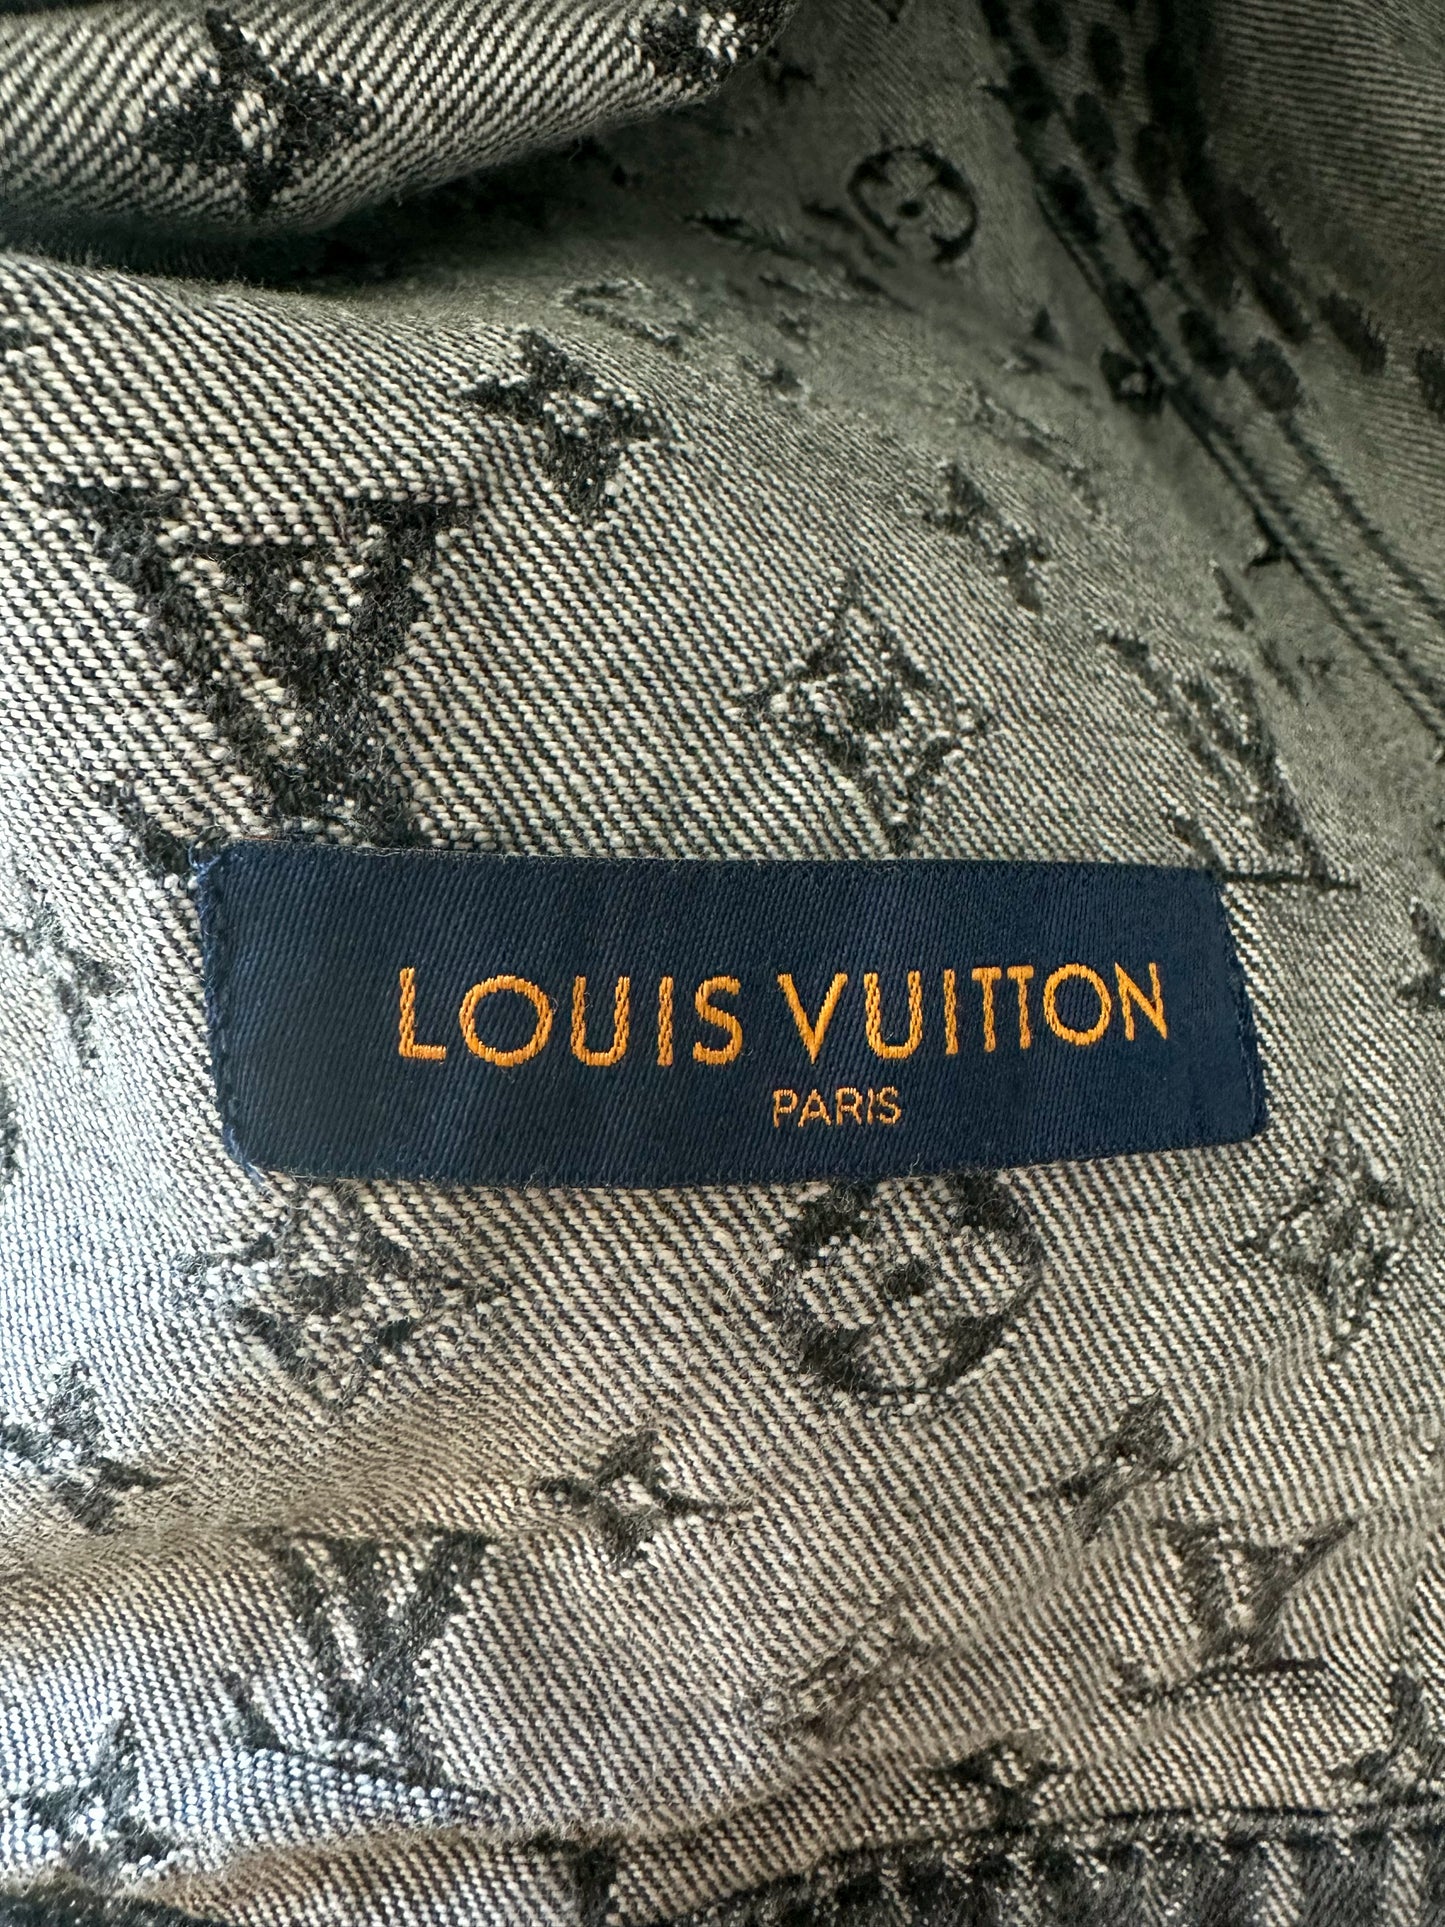 Products By Louis Vuitton: Giant Damier Wave Monogram Scarf